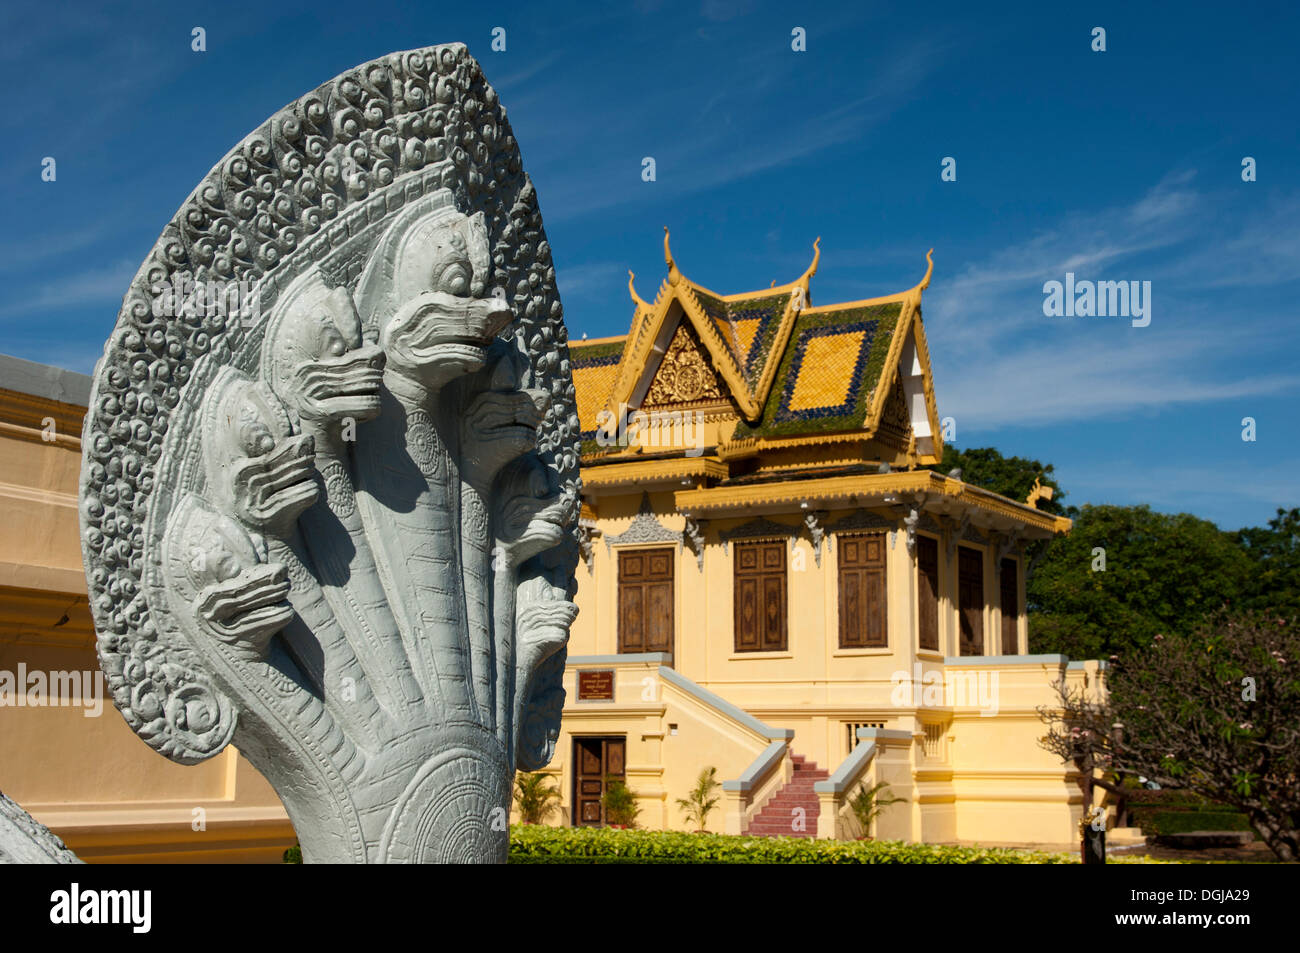 Sculpture of a seven-headed Naga snake in front of the Royal Hor Samran Phirun pavilion on the grounds of the Royal Palace Stock Photo